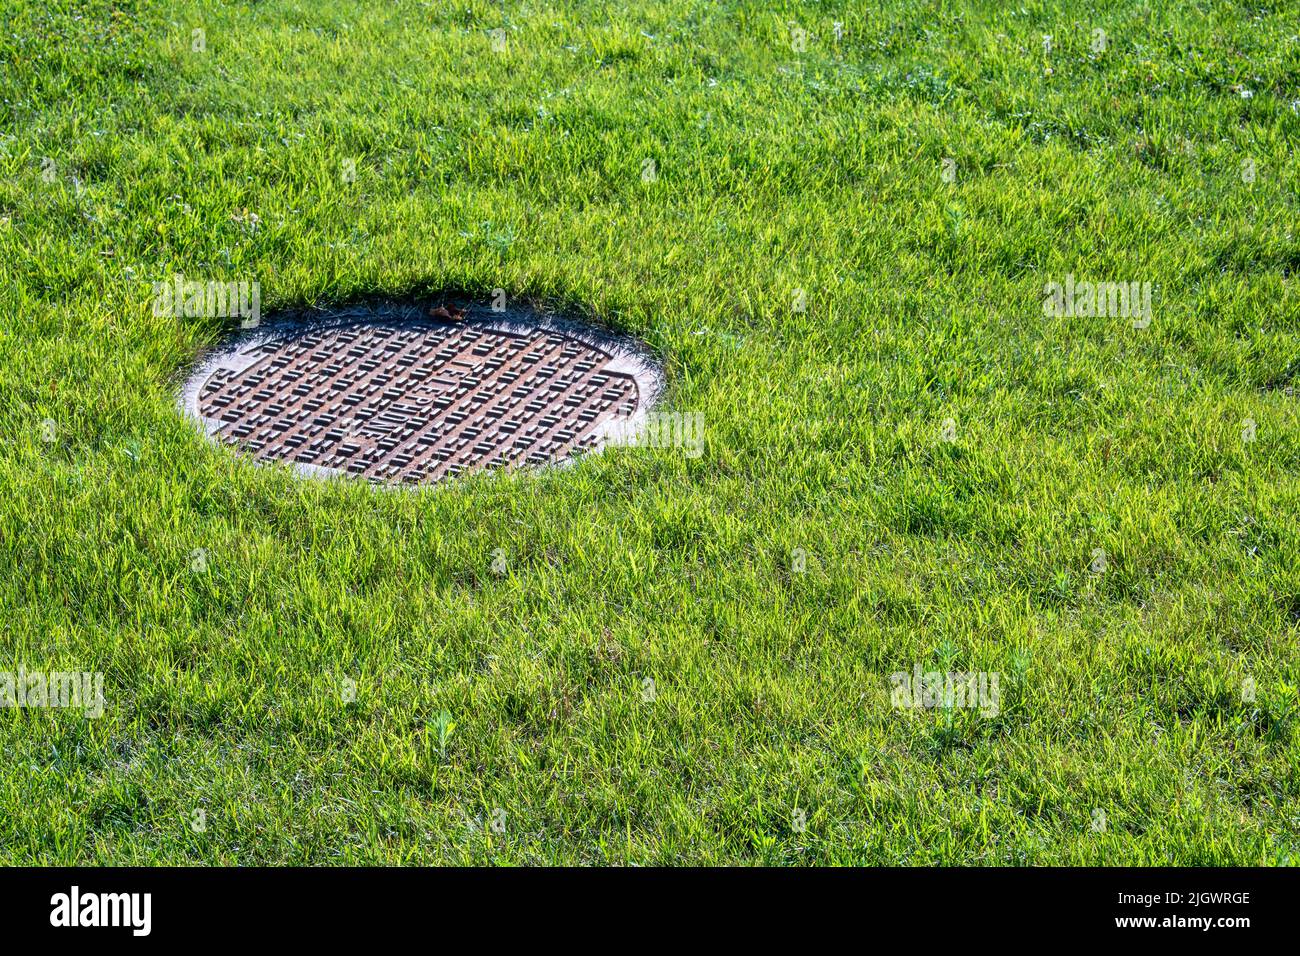 Grass and cast iron Manhole Cover Stock Photo